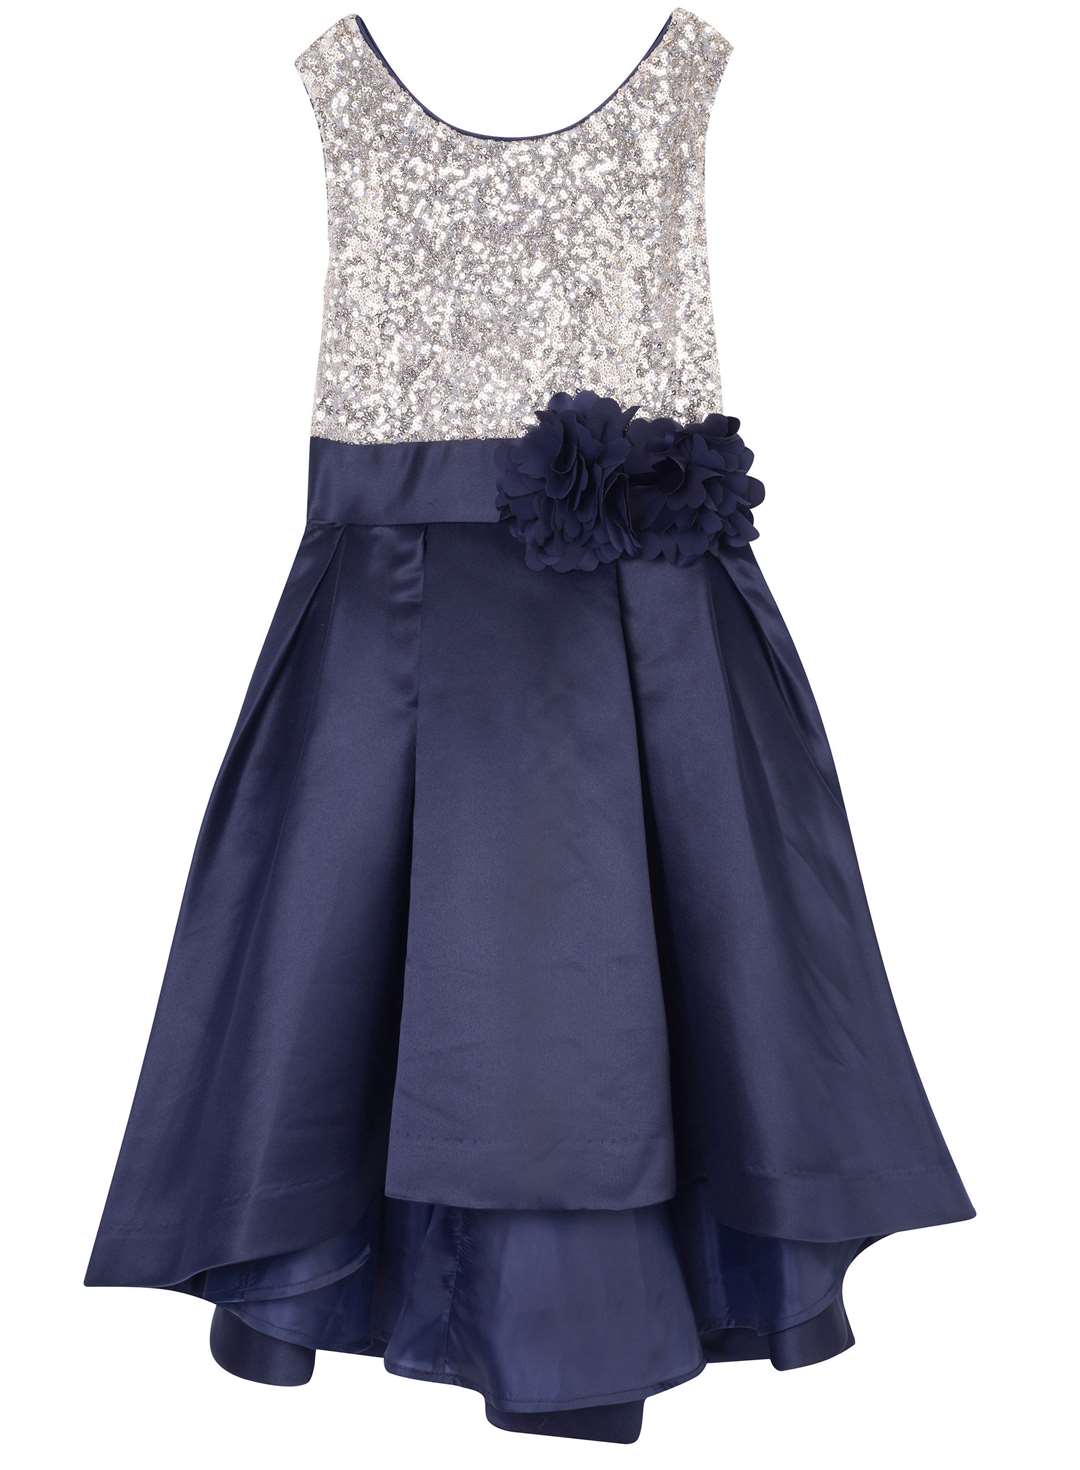 Be the belle of the ball with this dress from RJR John Rocha